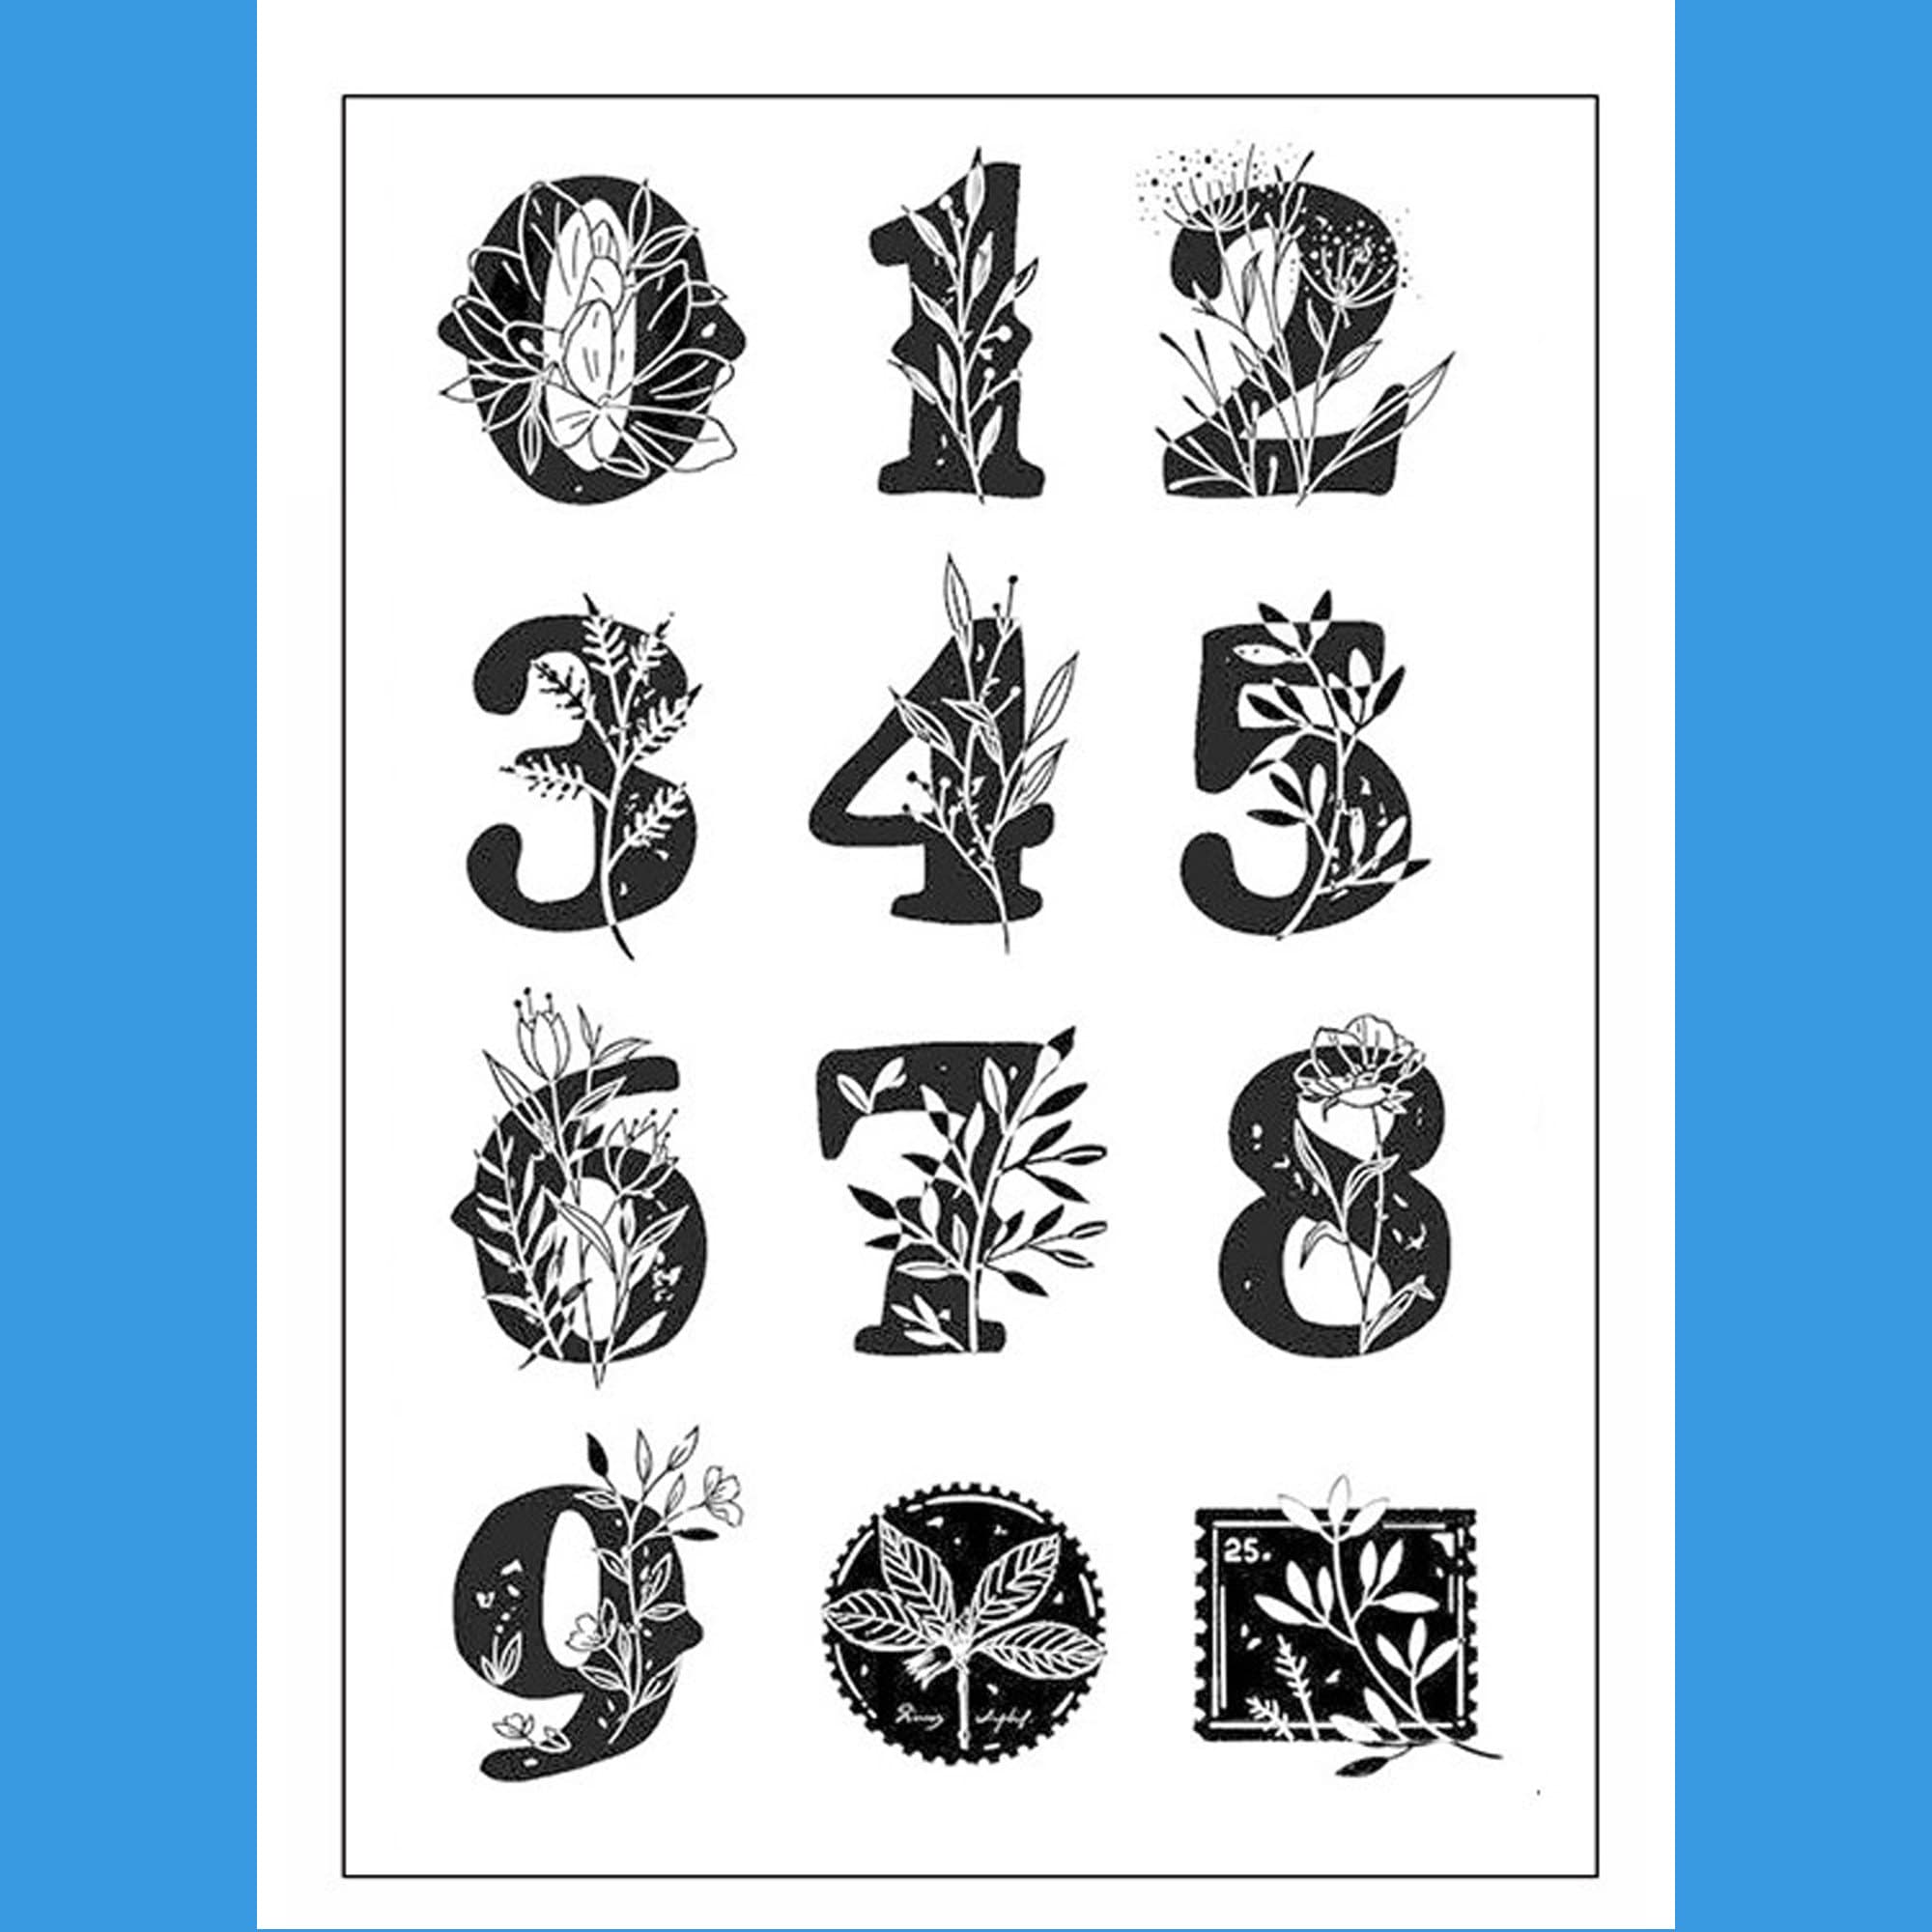 Capital 26 Alphabet Clear Stamps Silicone Stamp Cards with Sentiments, 26 Alphabet Letters Transparent Seal Stamps for Holiday Card Making